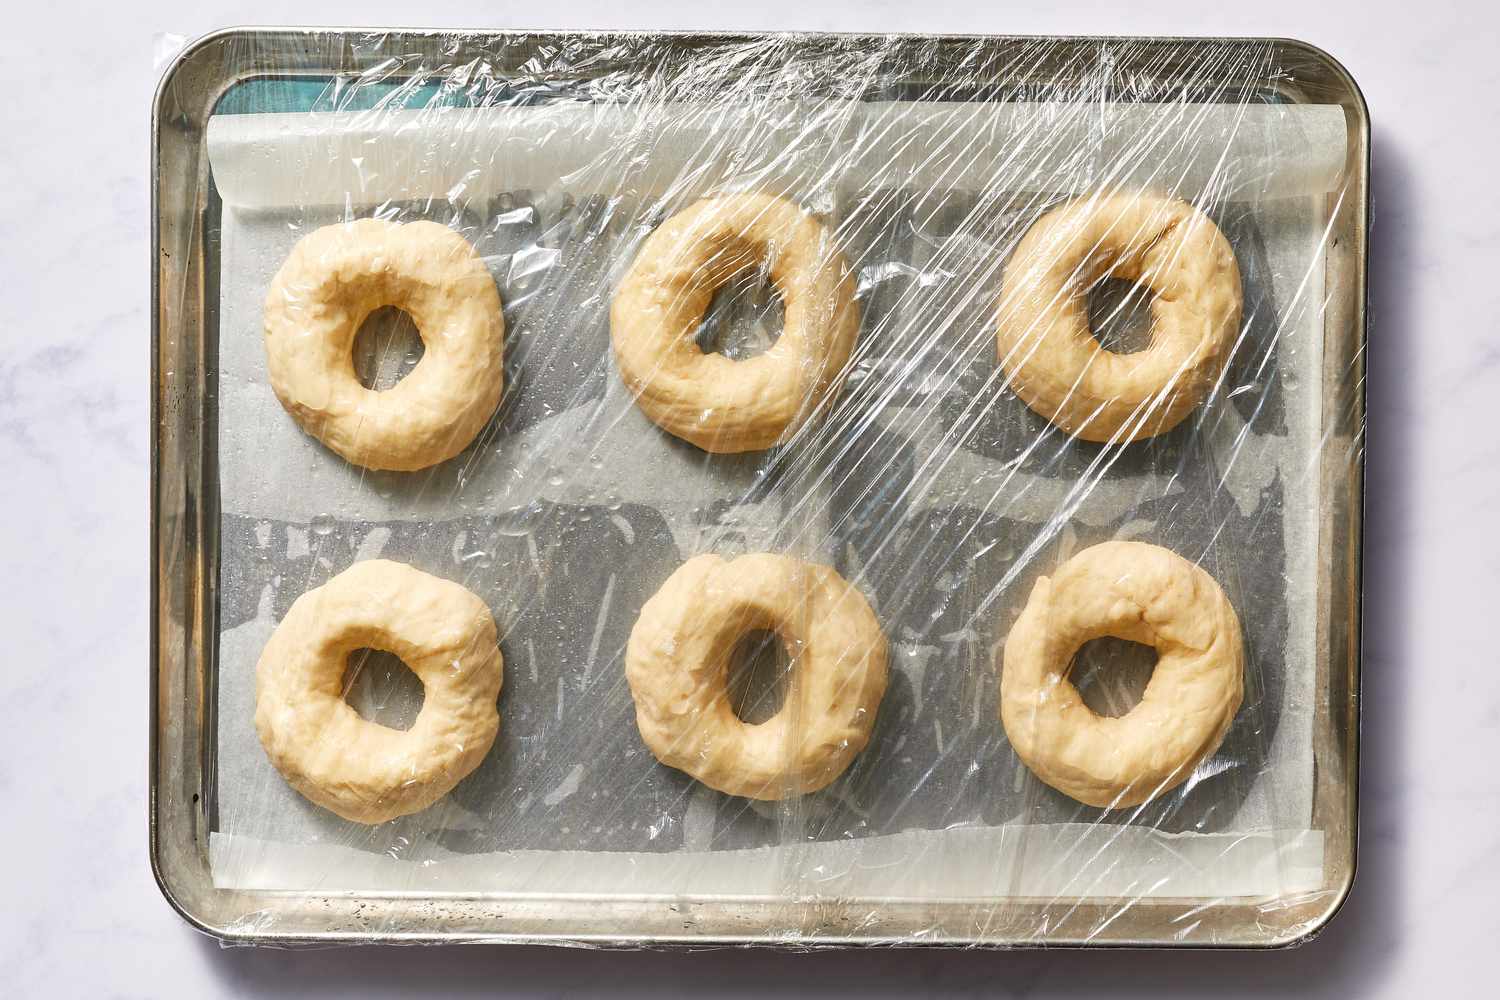 Place the bagels on the parchment and cover them with plastic wrap